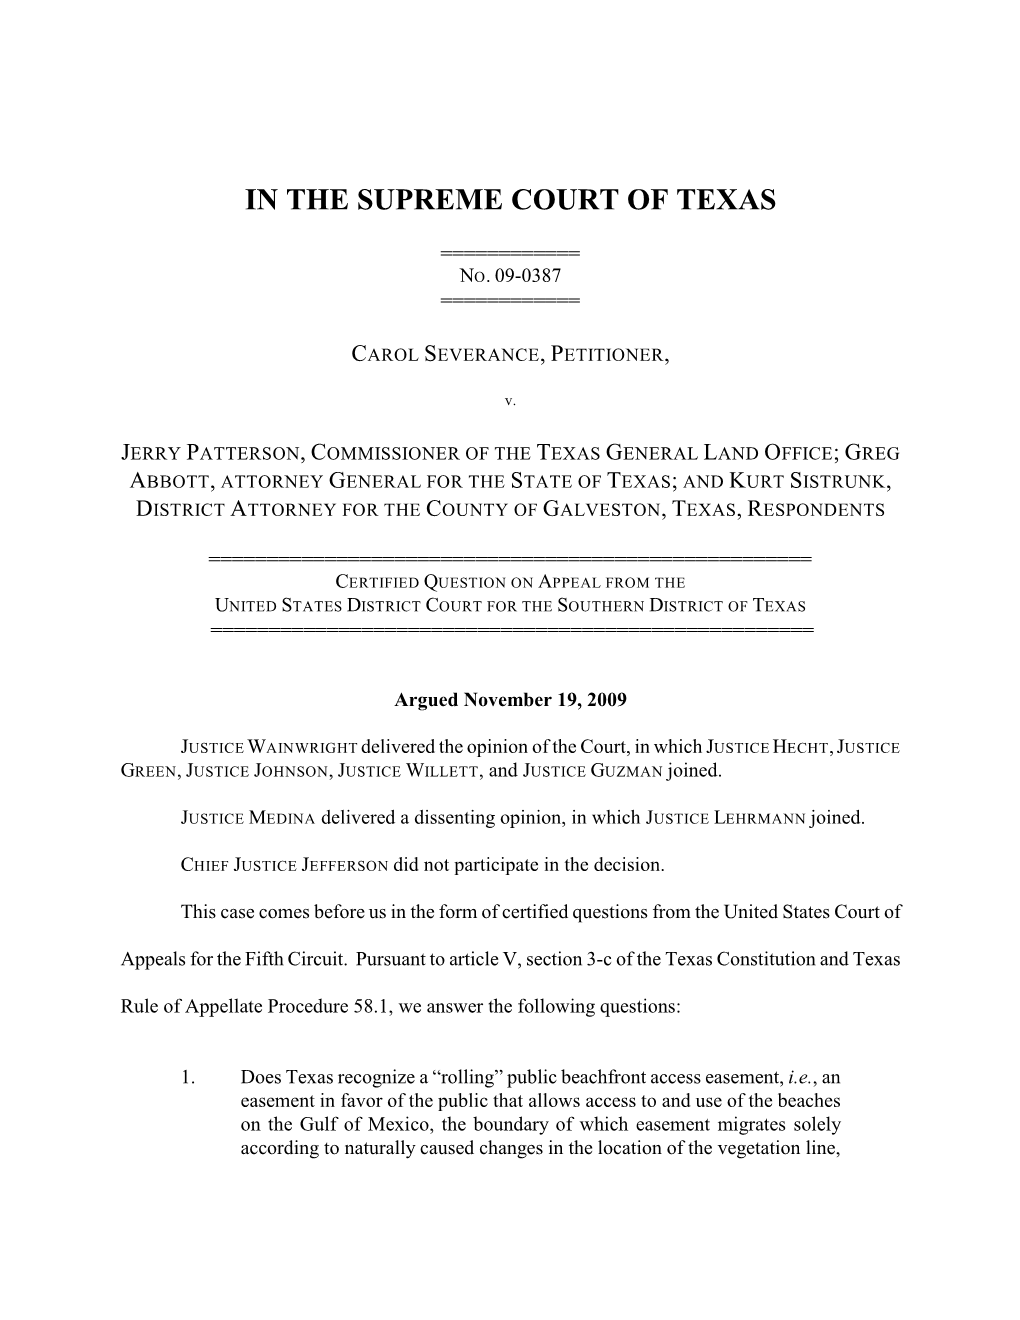 In the Supreme Court of Texas